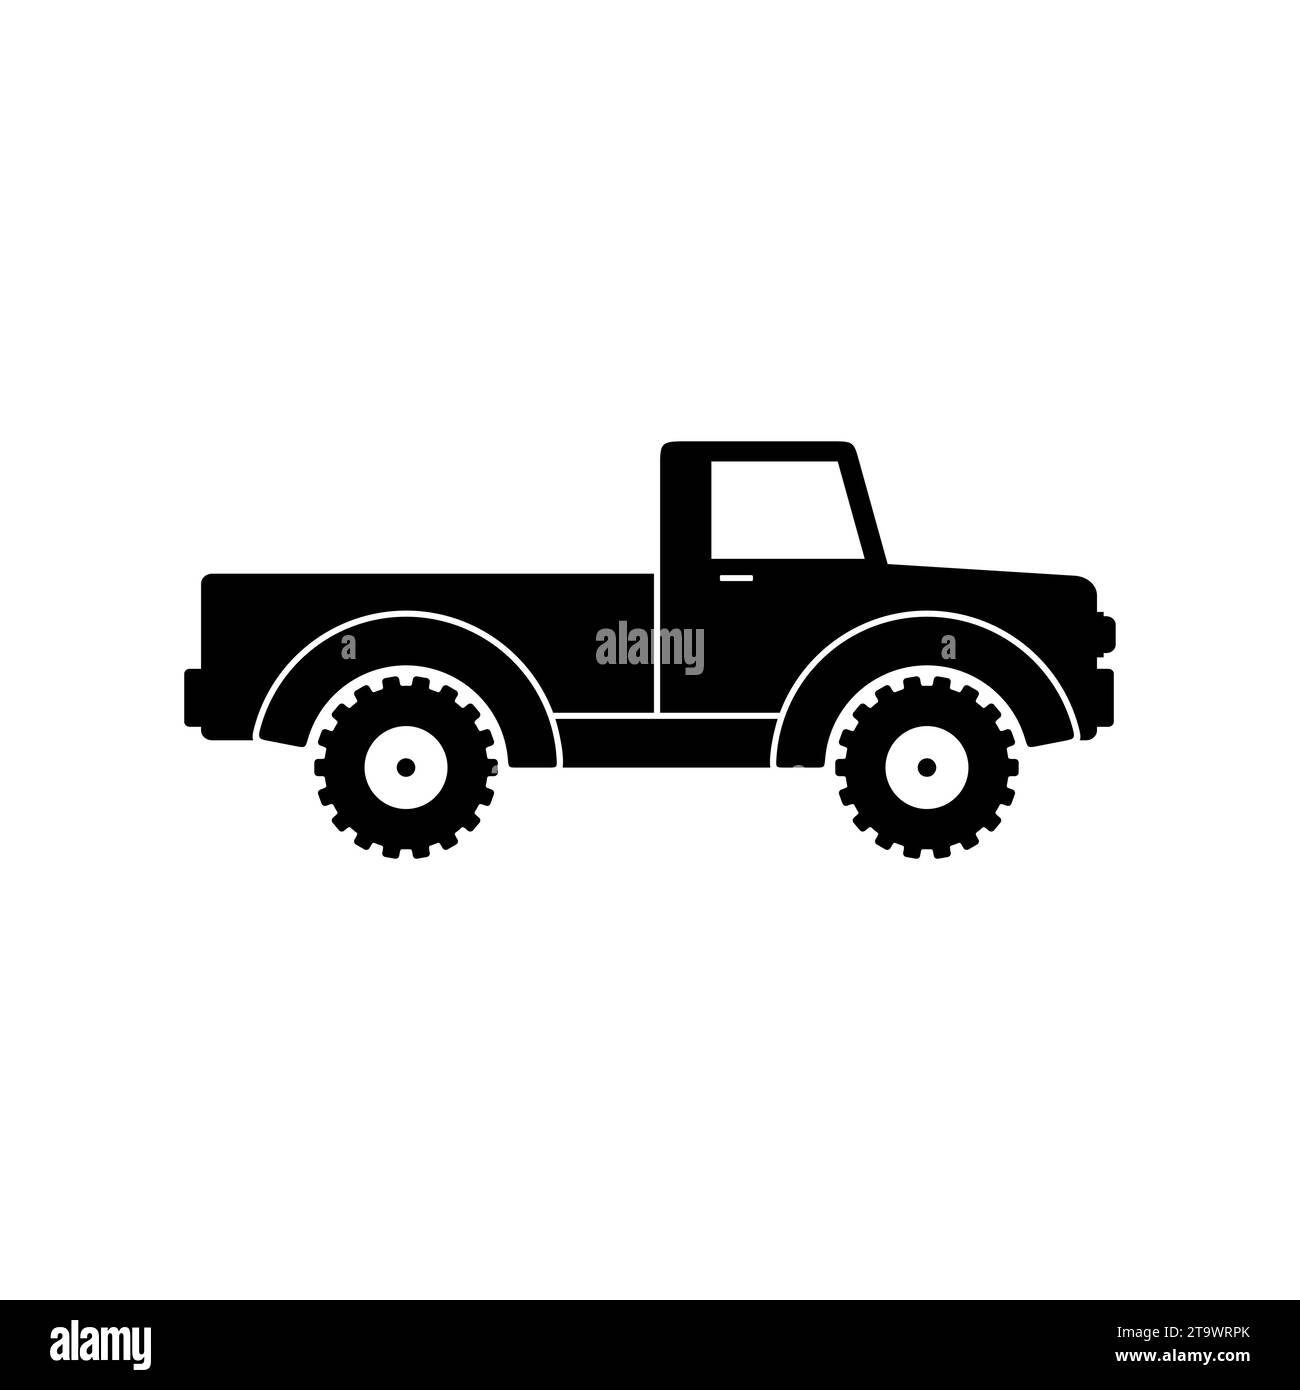 Retro pickup truck icon isolated on white background. Classic farming vehicles for transportation and hauling production. Vintage transport car Stock Vector